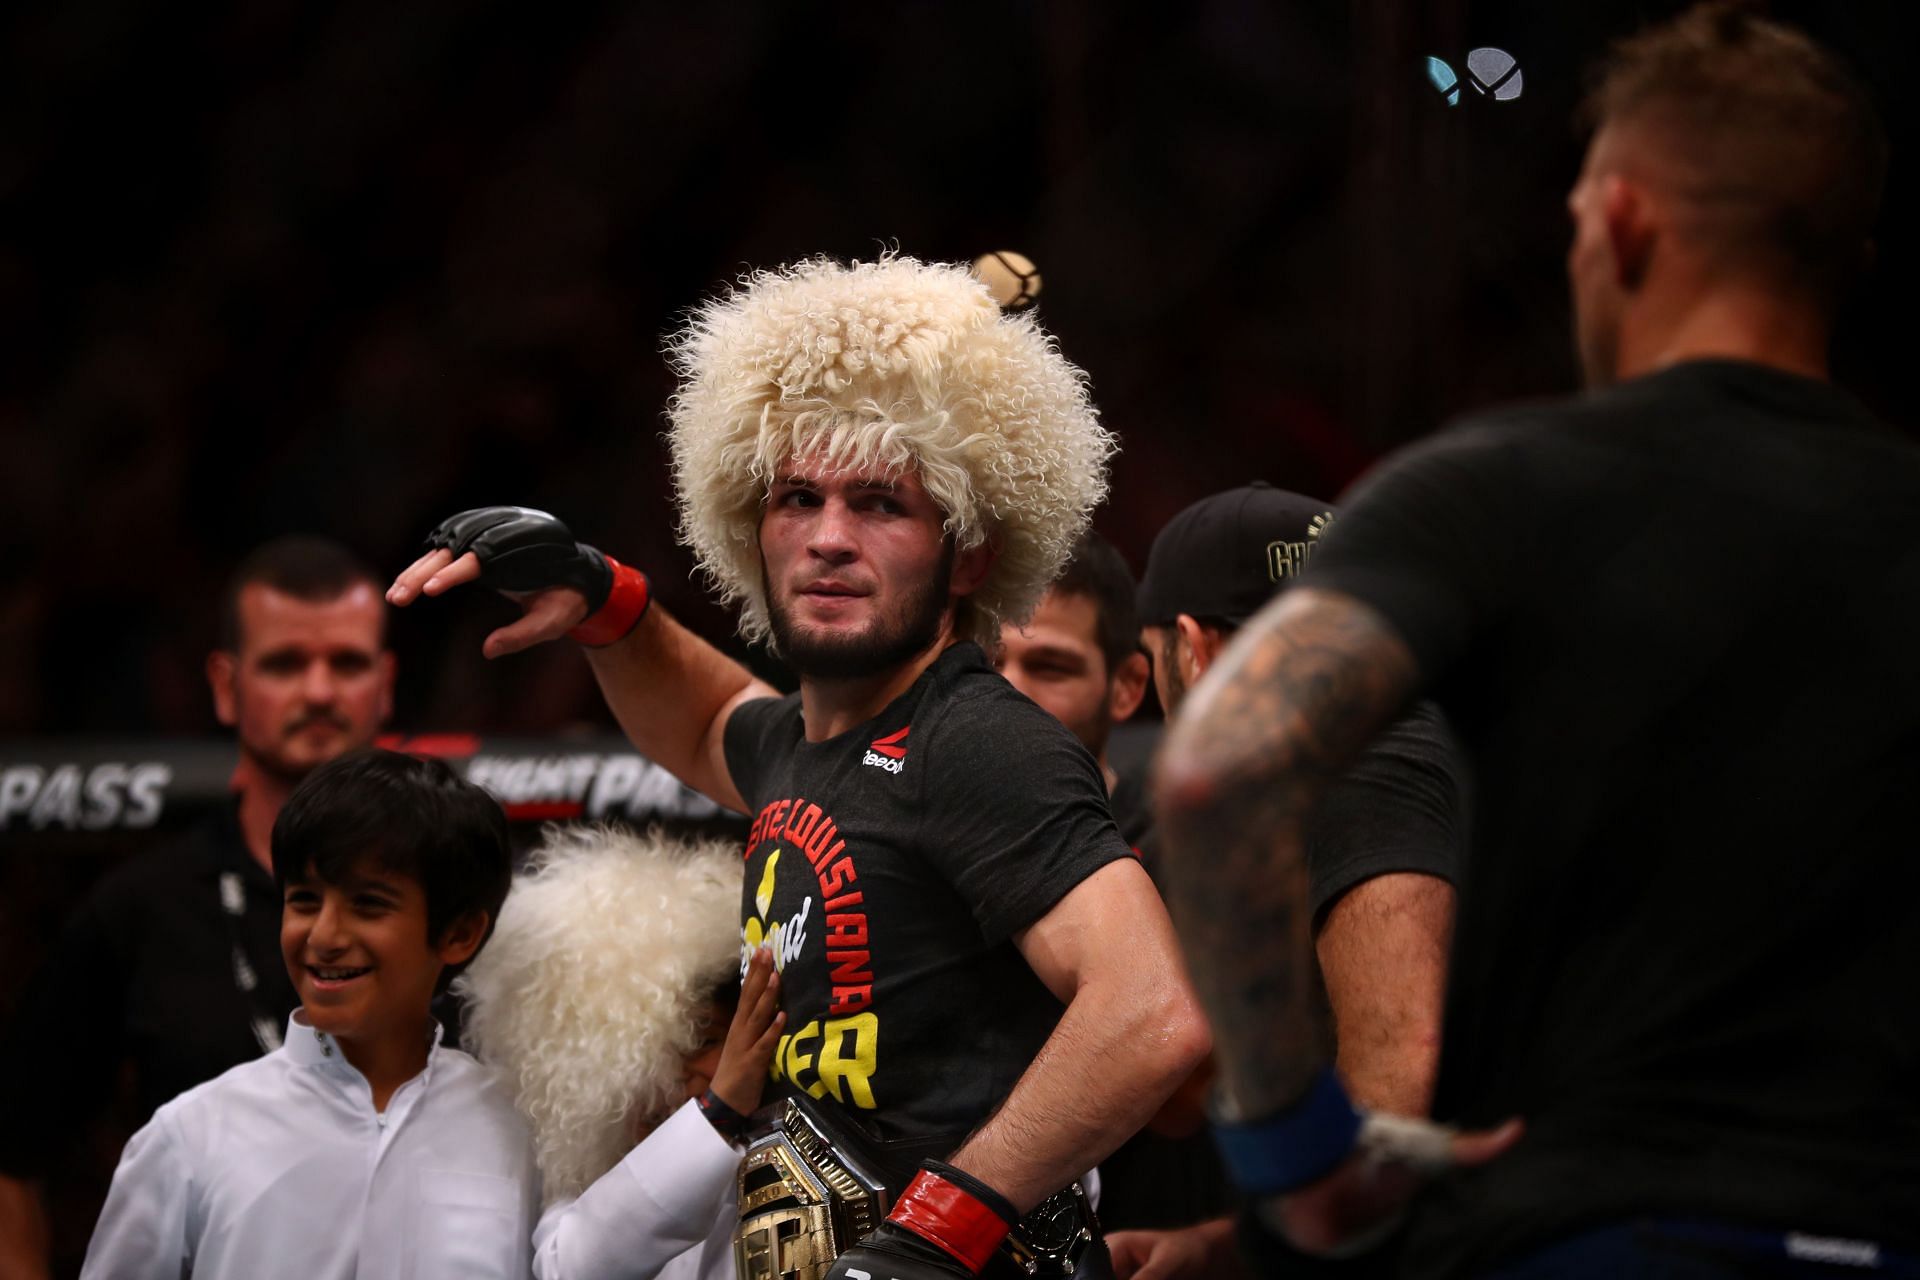 Khabib Nurmagomedov swapped shirts with Dustin Poirier after their fight